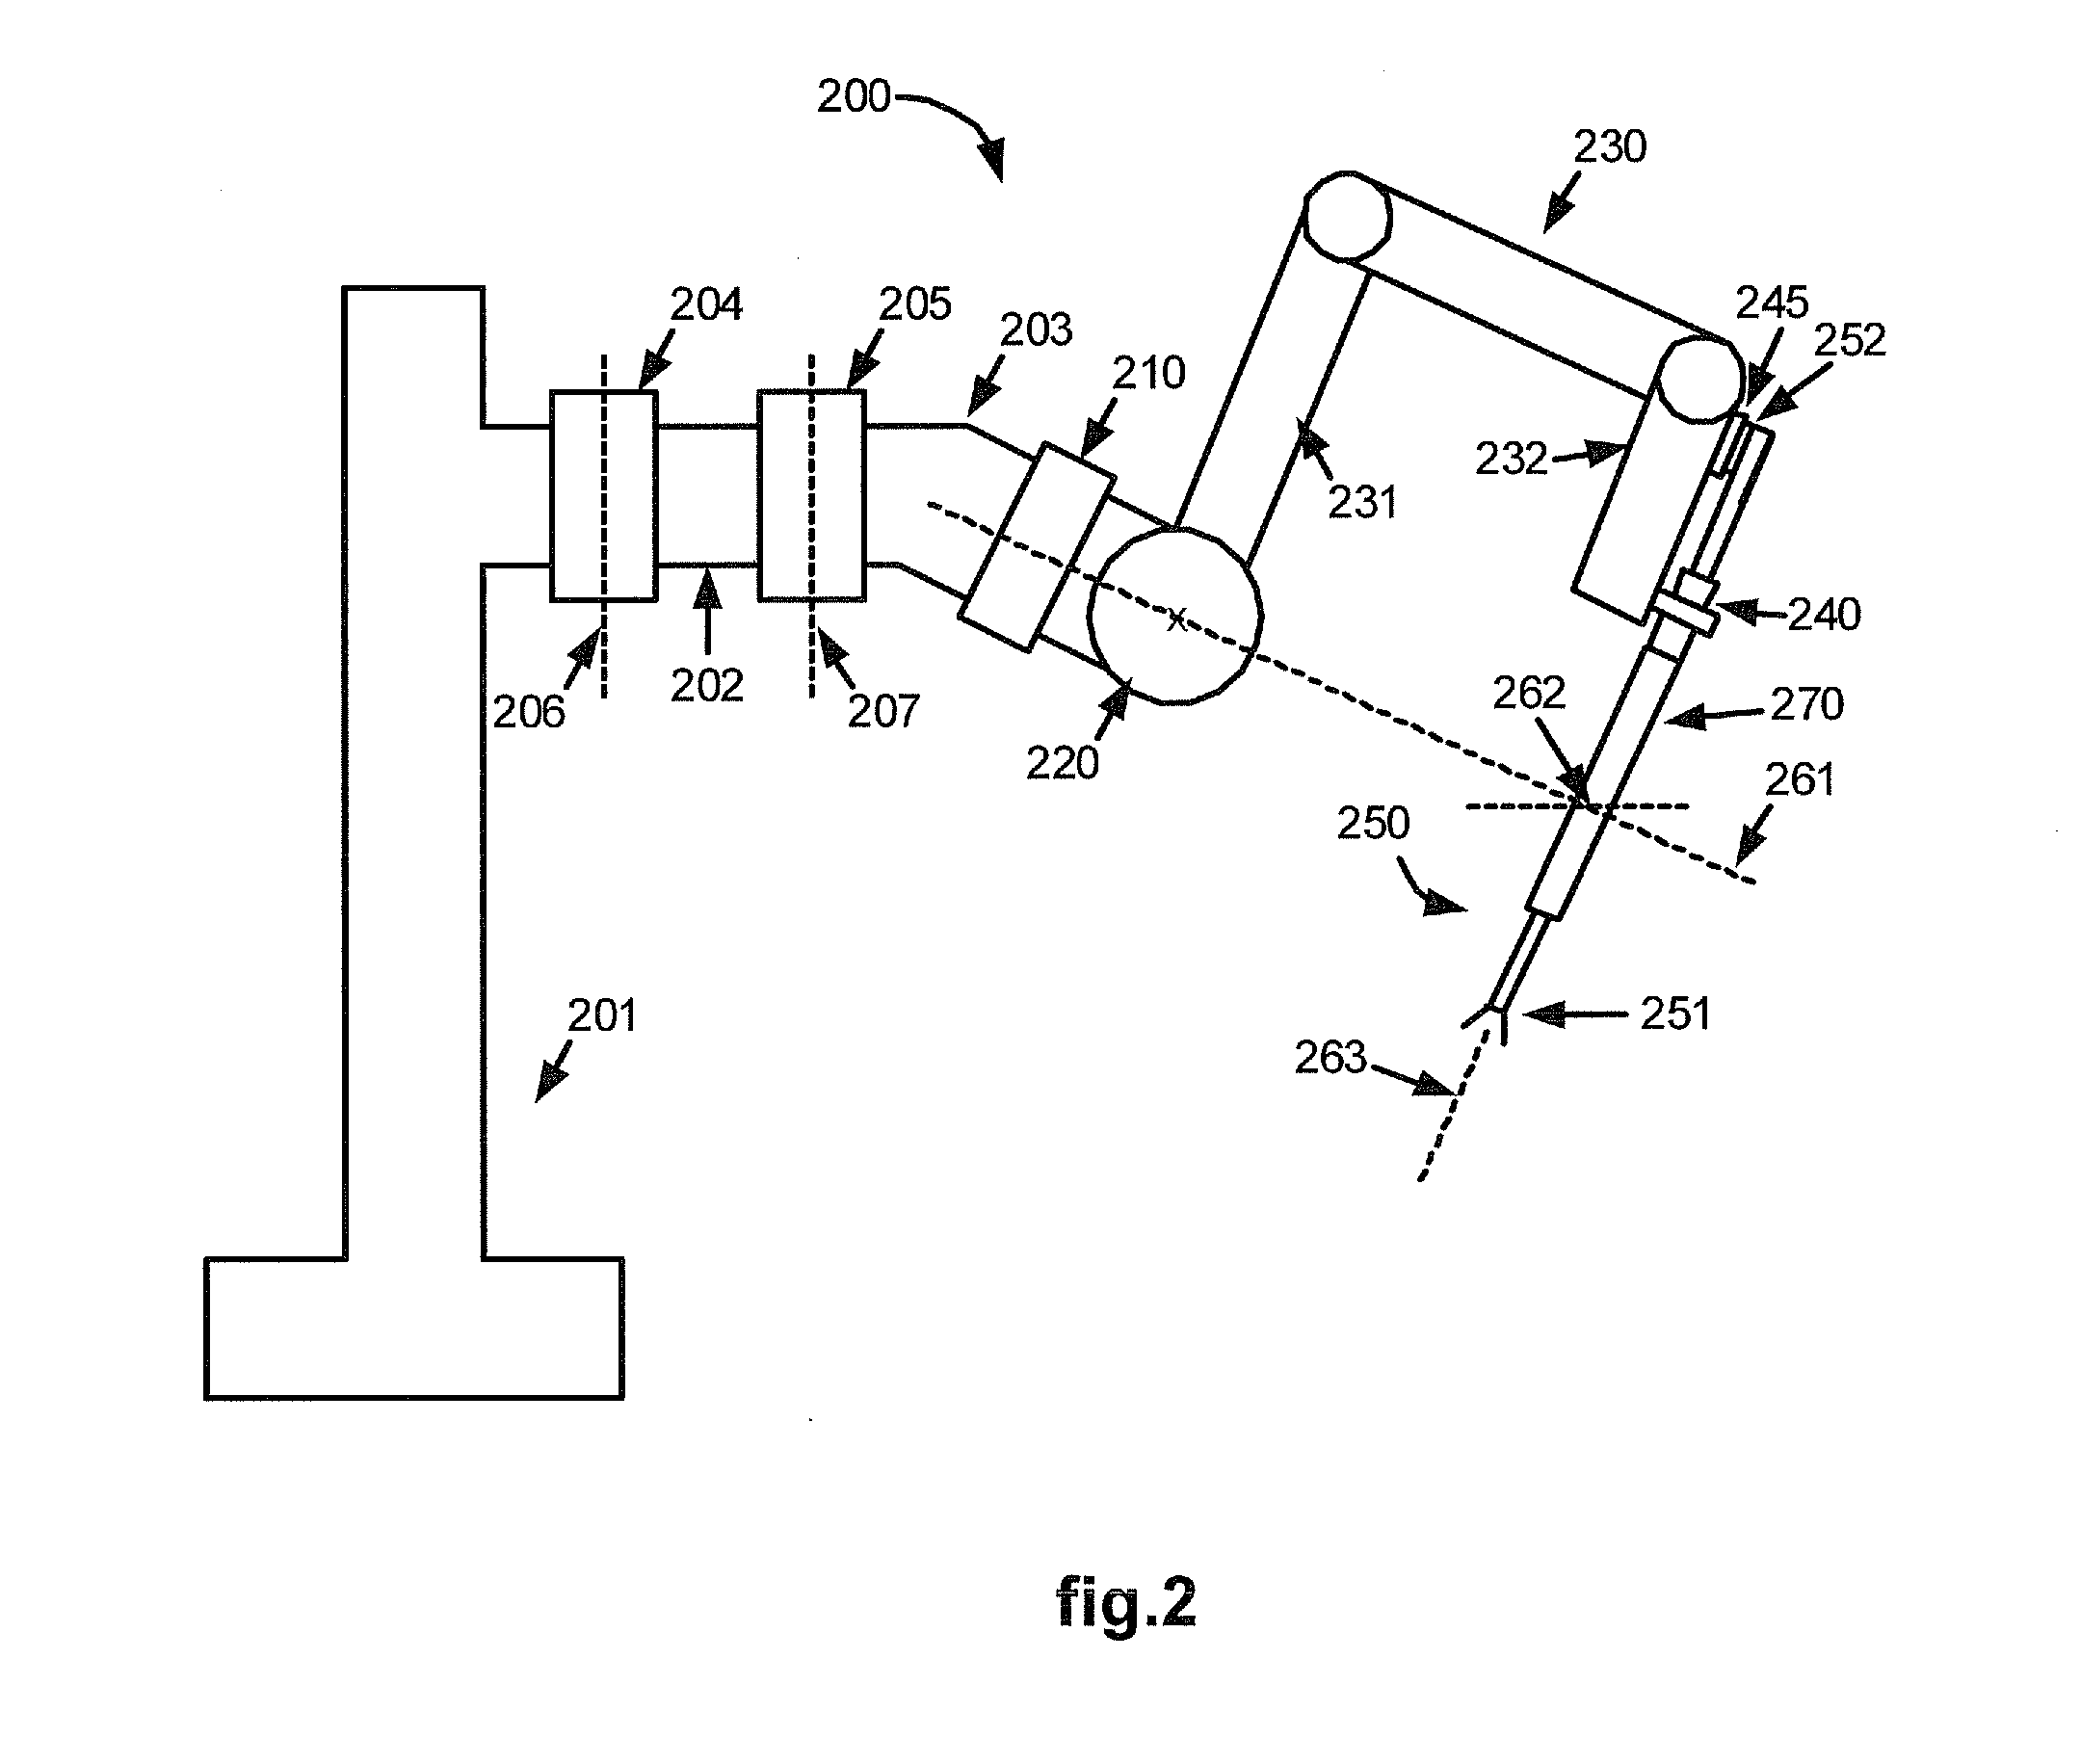 Control system configured to compensate for non-ideal actuator-to-joint linkage characteristics in a medical robotic system